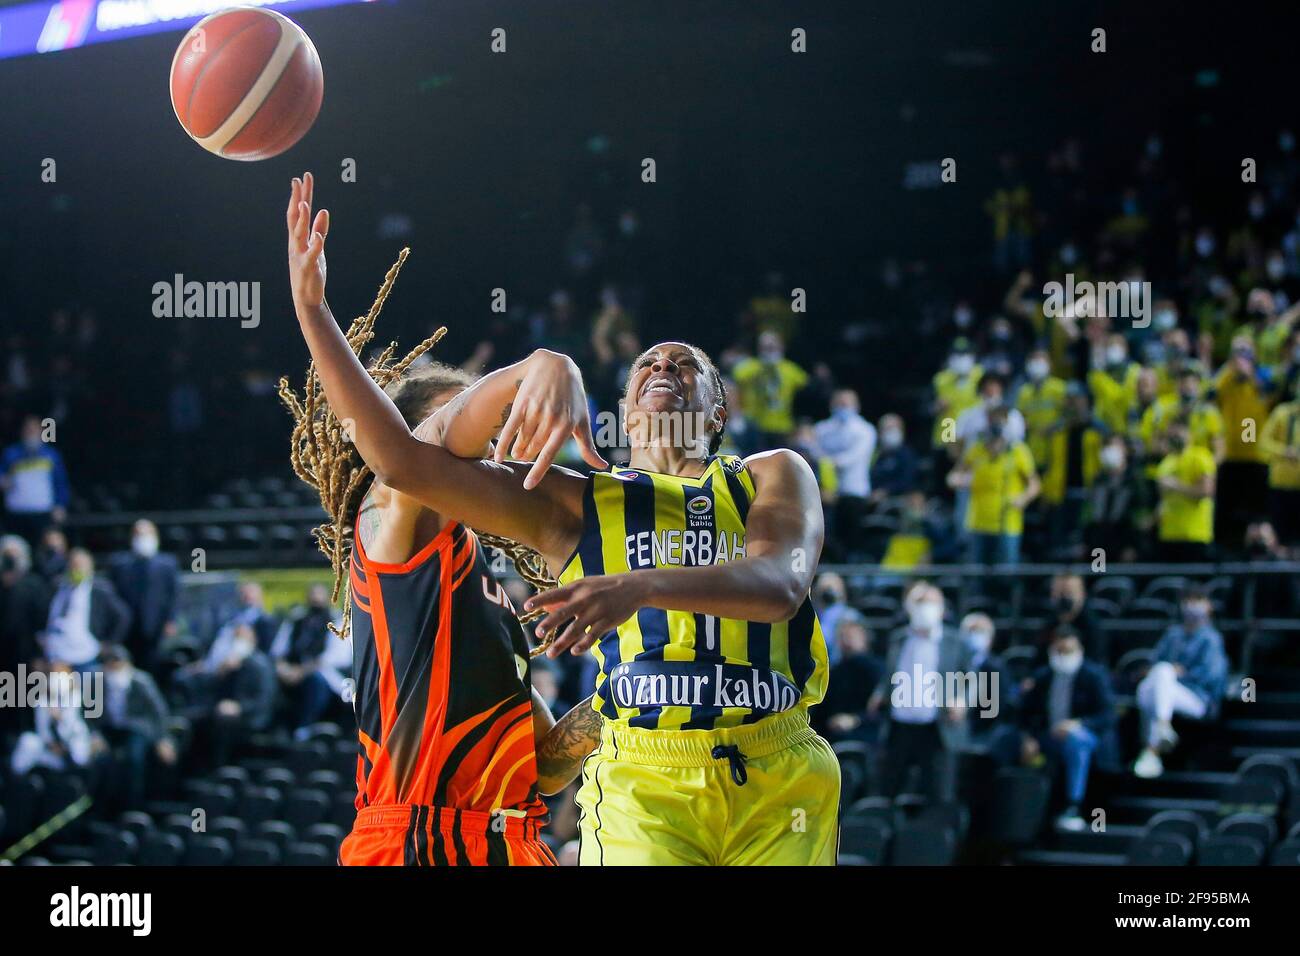 ISTANBUL, Turkey. 16th Apr, 2021: Istanbul, Turkey. 16th Apr, 2021. ISTANBUL, TURKEY - APRIL 16: Kia Vaughn of Fenerbahce Oznur Kablo during the Euroleague Women Final Four match between Fenerbahce Oznur Kablo and UMMC Ekaterinburg at Volkswagen Arena on April 16, 2021 in Istanbul, Turkey (Photo by /Orange Pictures) Credit: Orange Pics BV/Alamy Live News Stock Photo